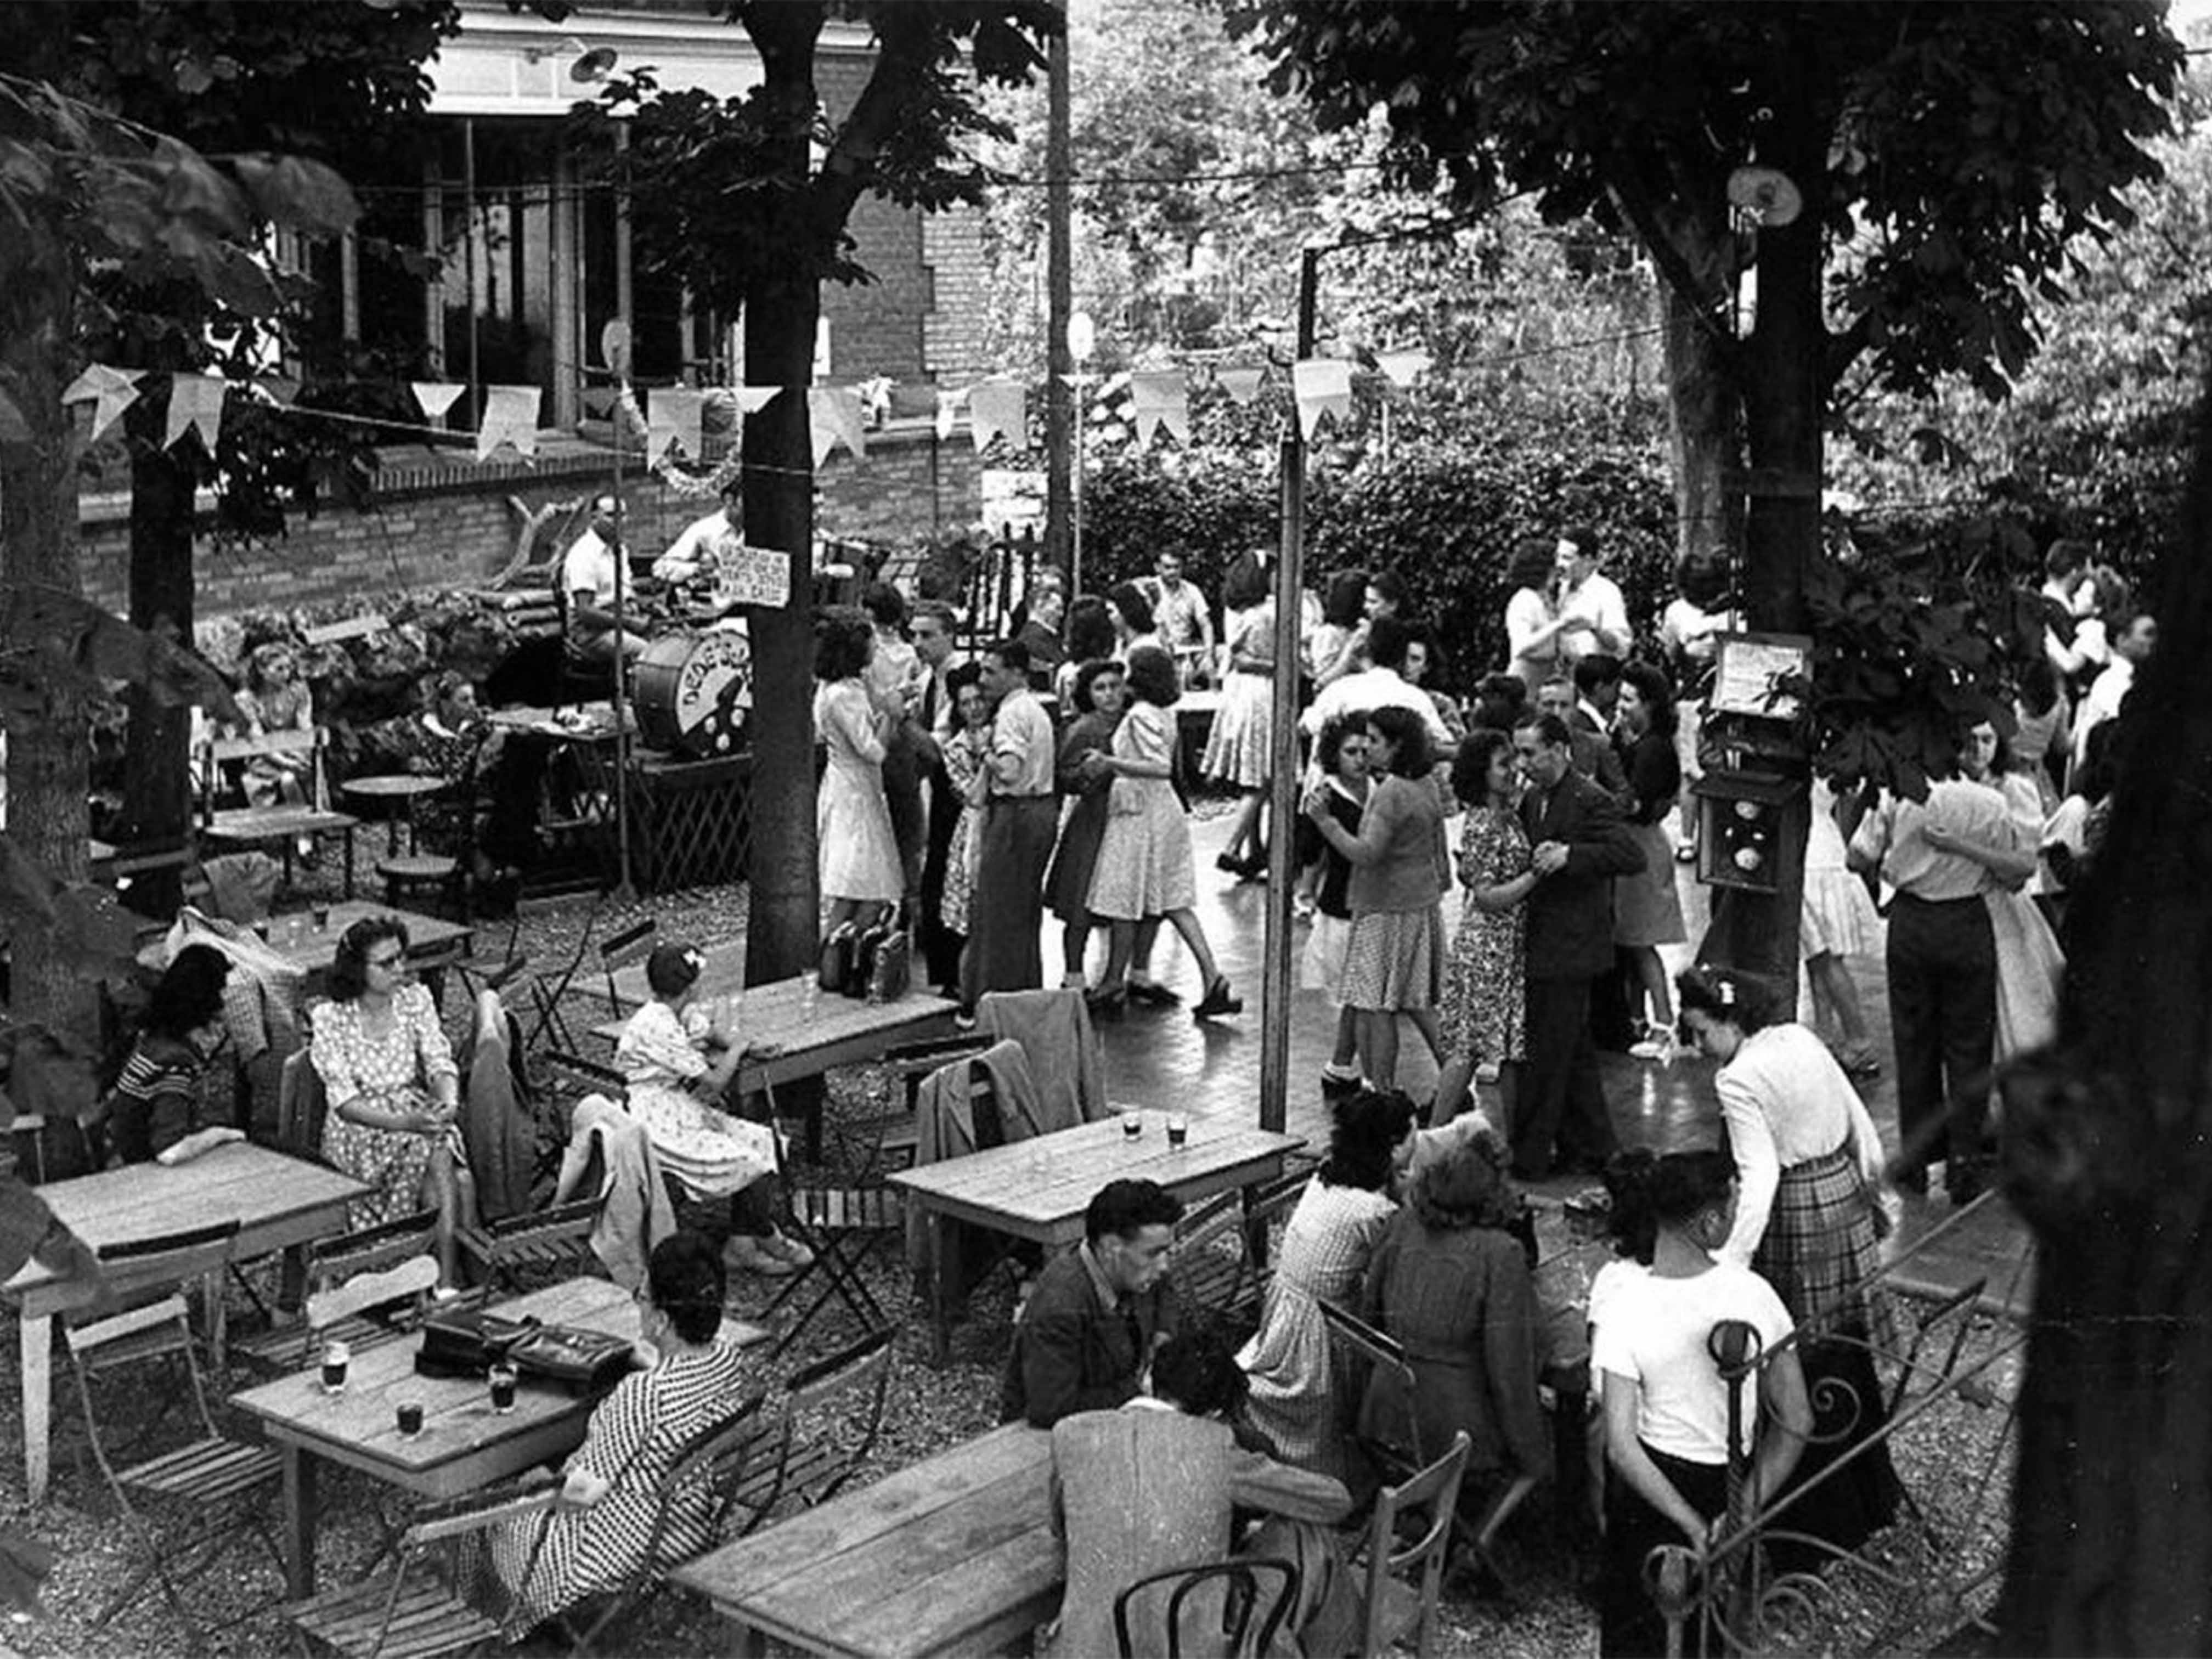 1950's scene of a party in France